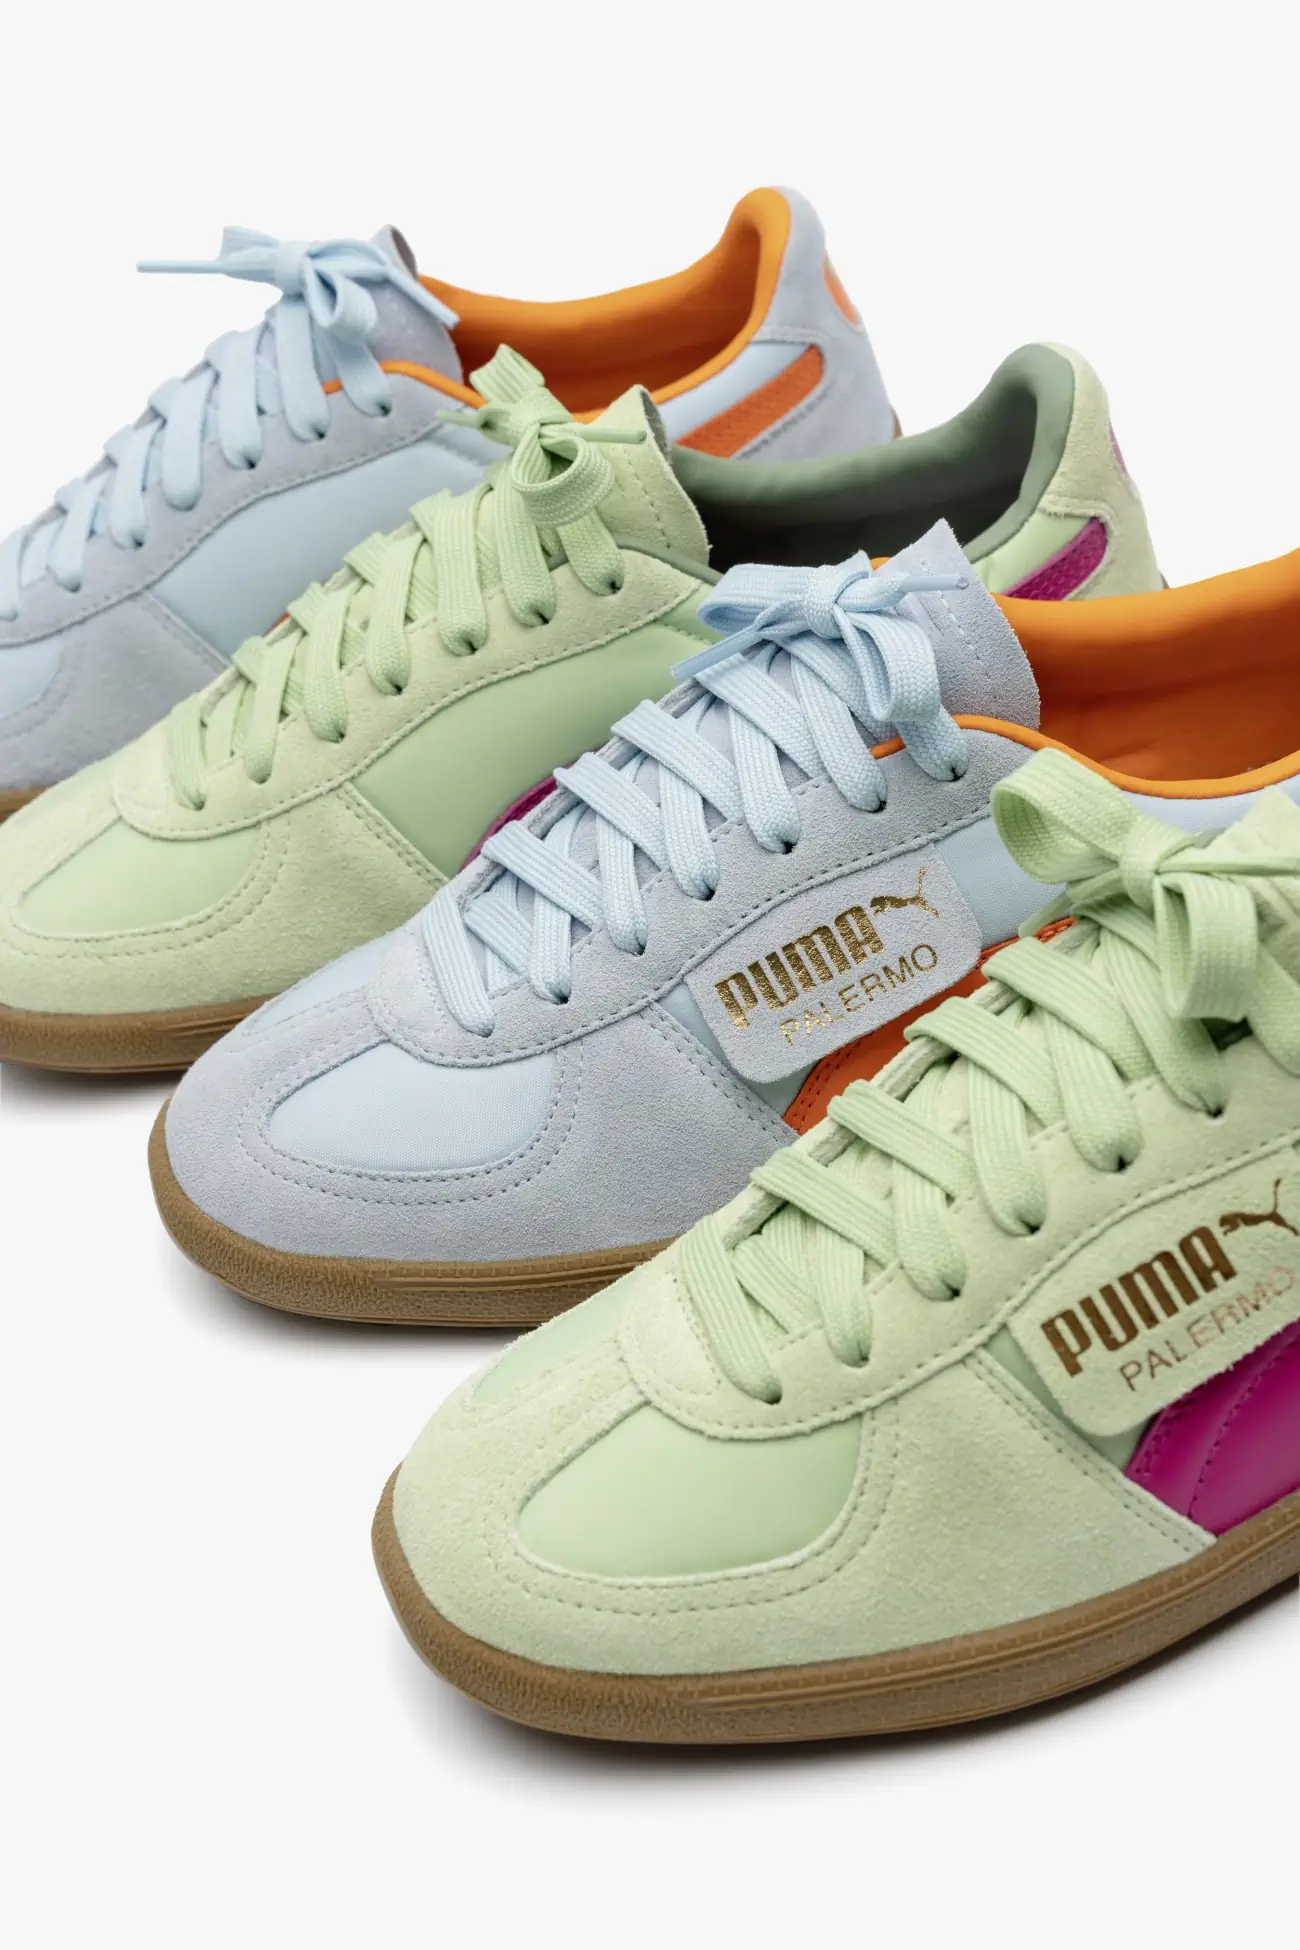 The Puma Palermo OG: Resurgence of a 80's terrace icon inspired by Sicilian heritage